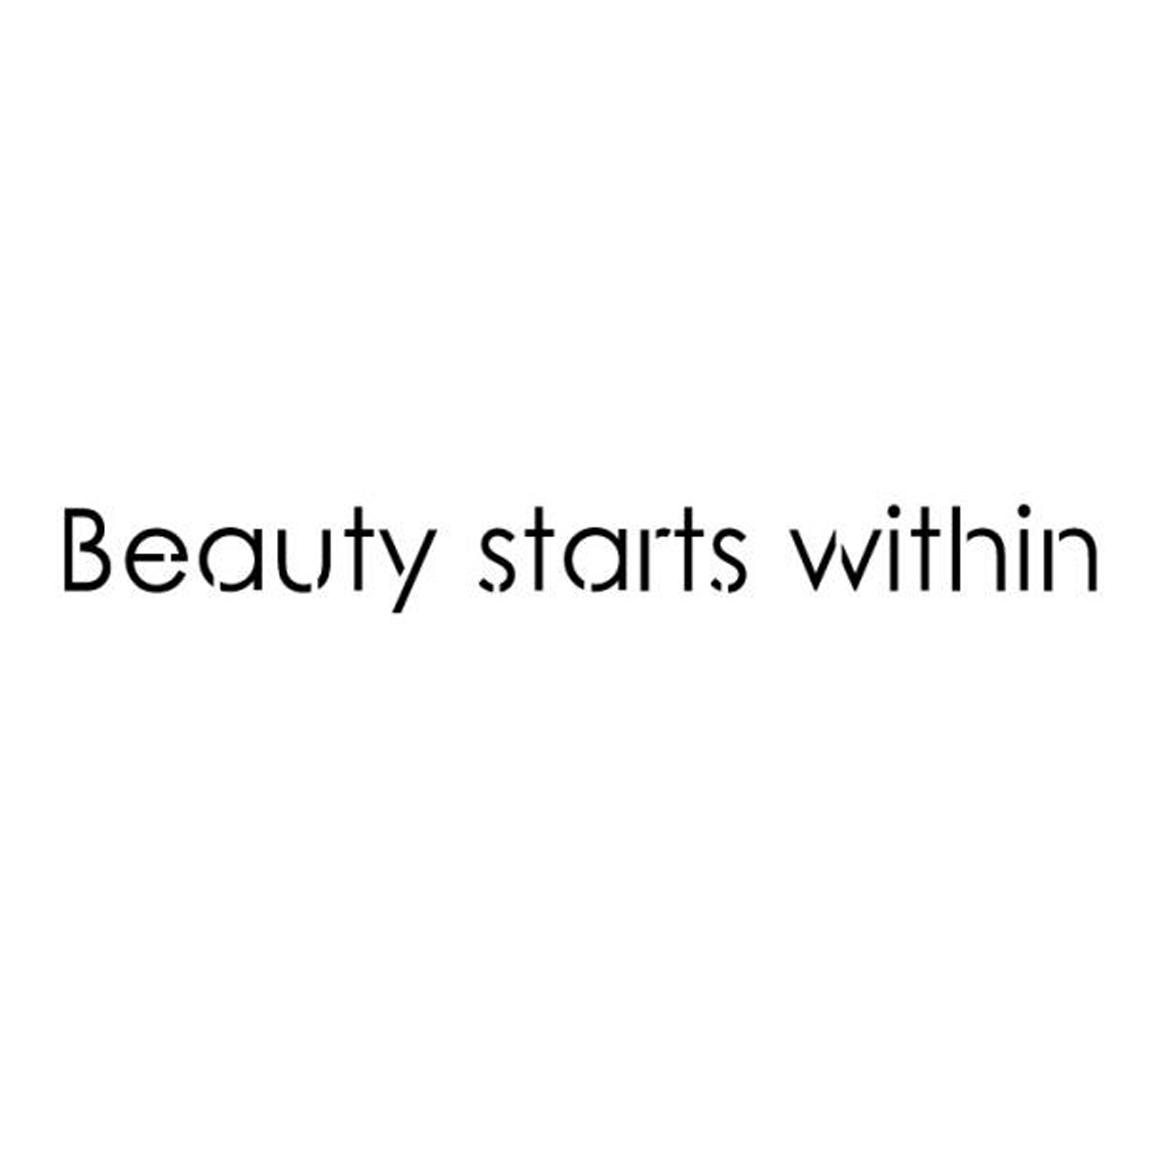 BEAUTY STARTS WITHIN